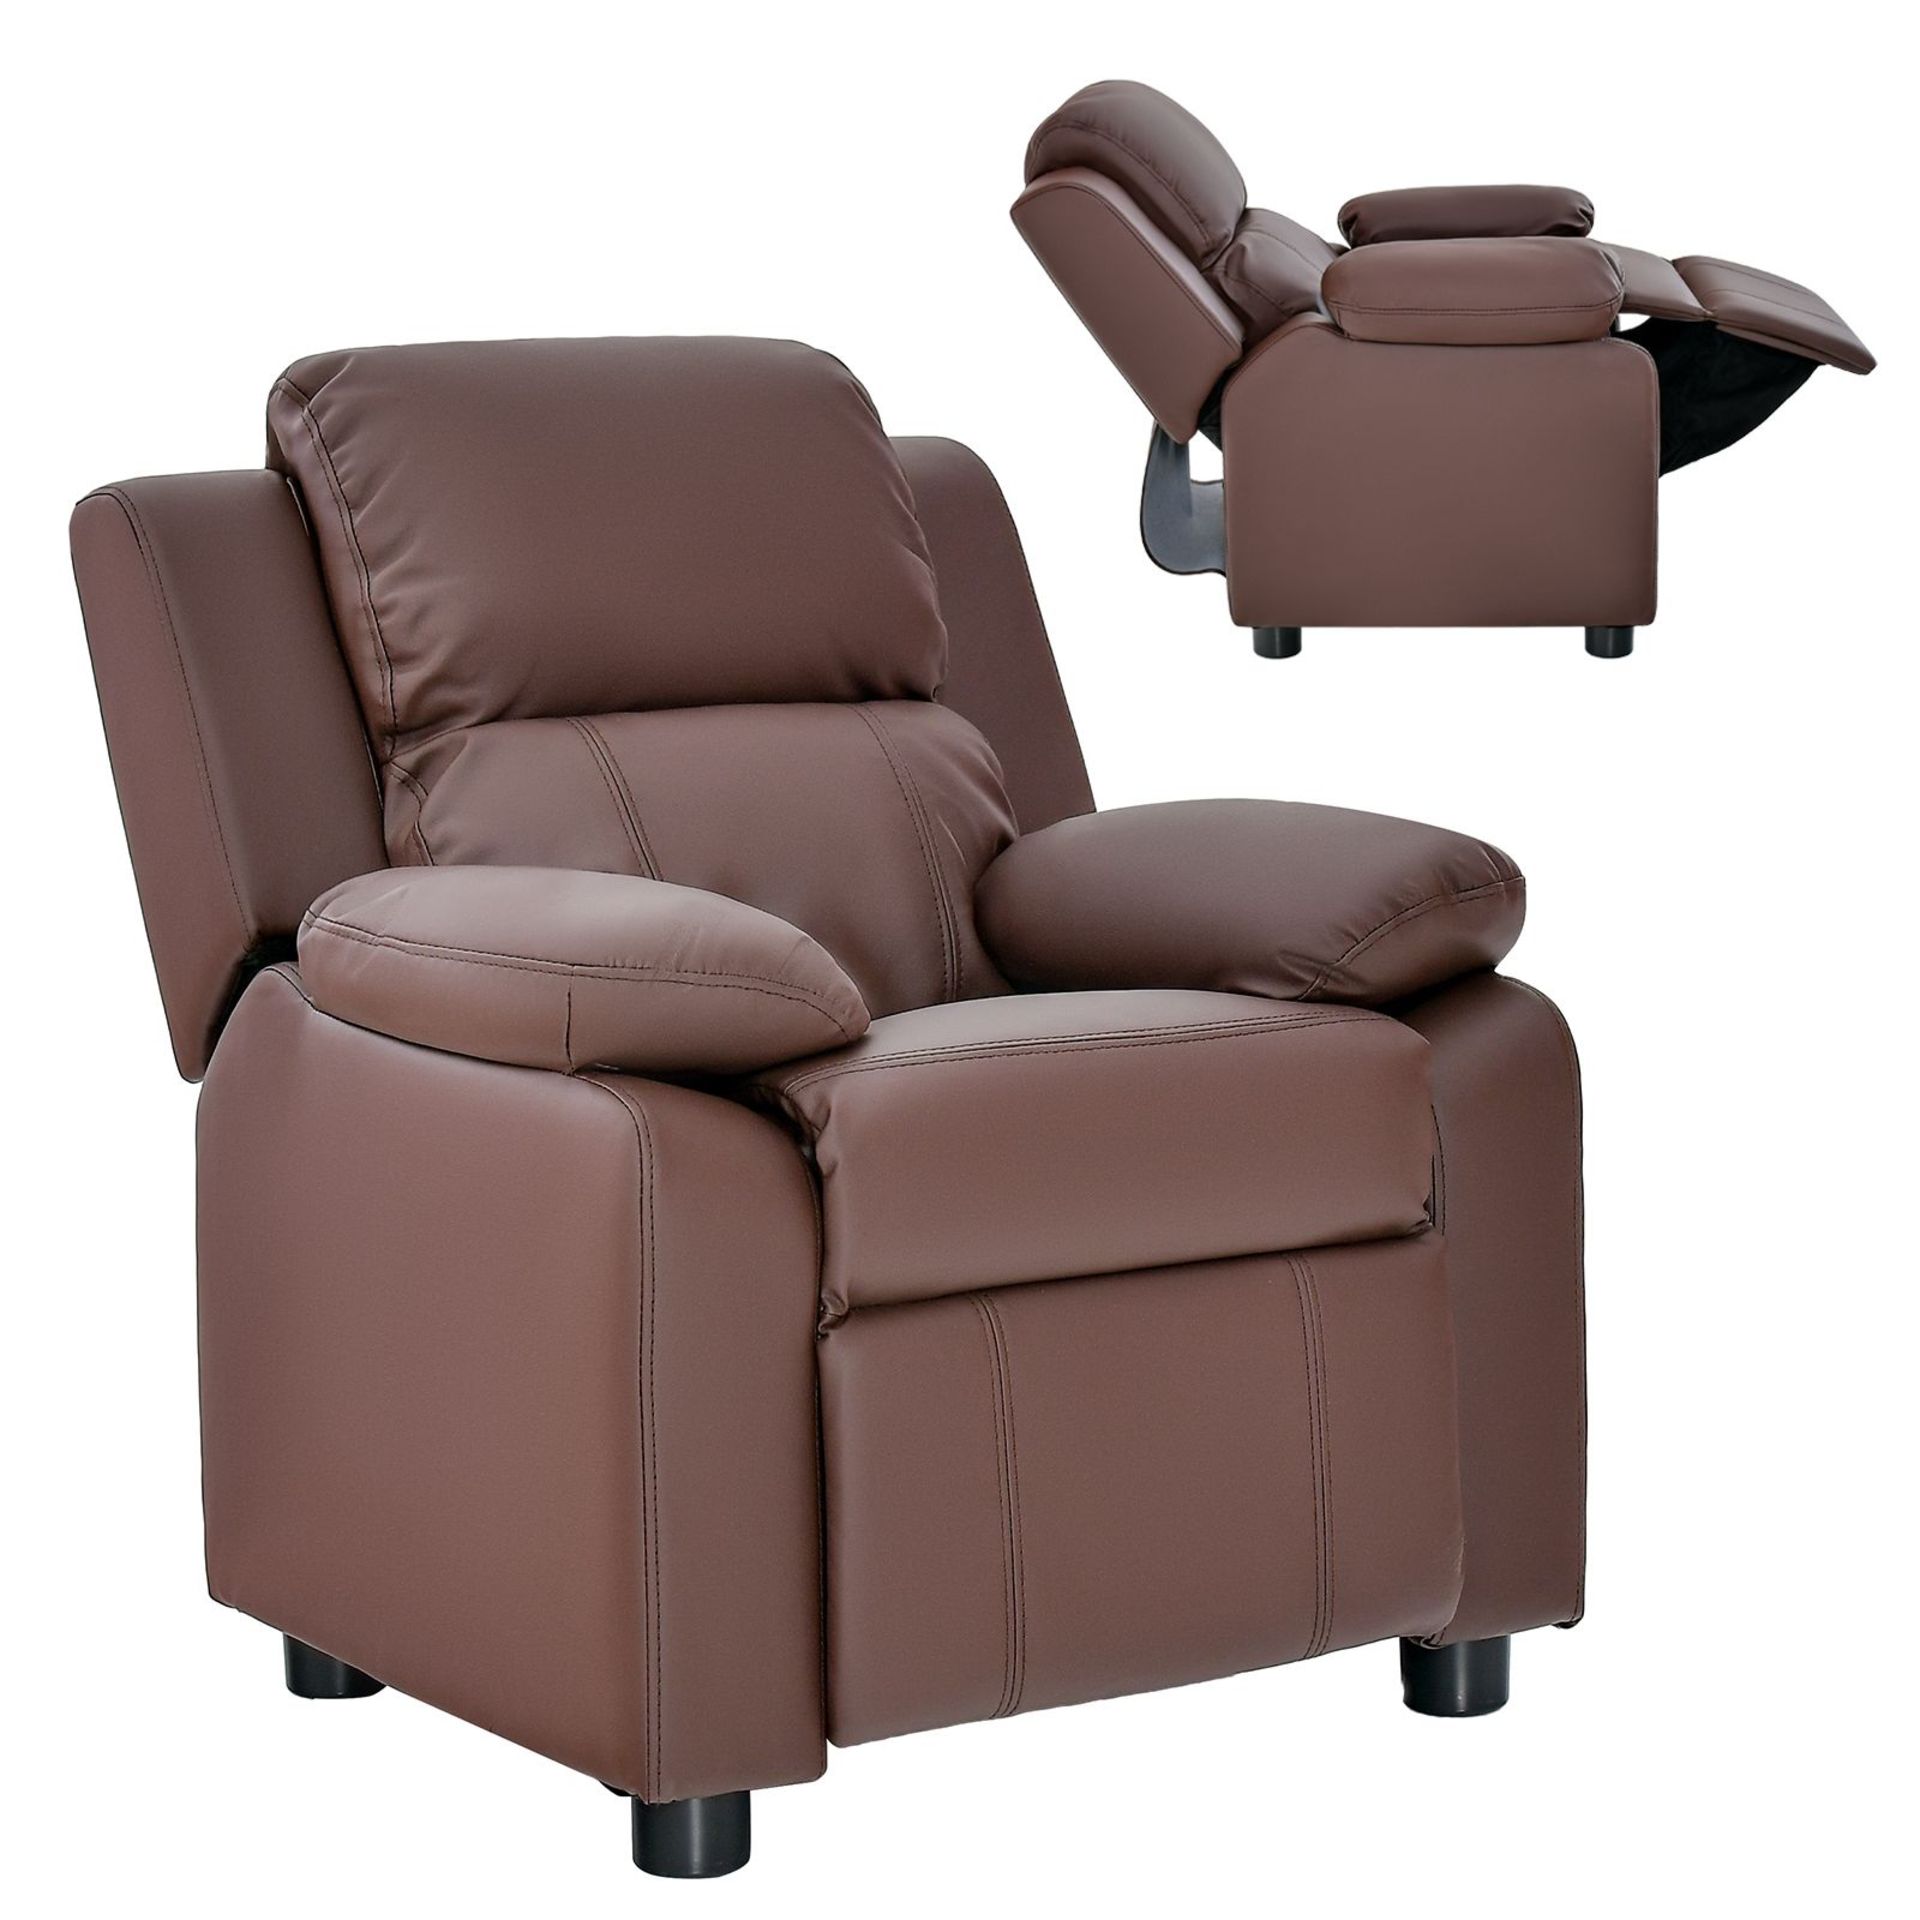 Kids Recliner Chair with Adjustable Backrest and Footrest-Coffee. - ER26.